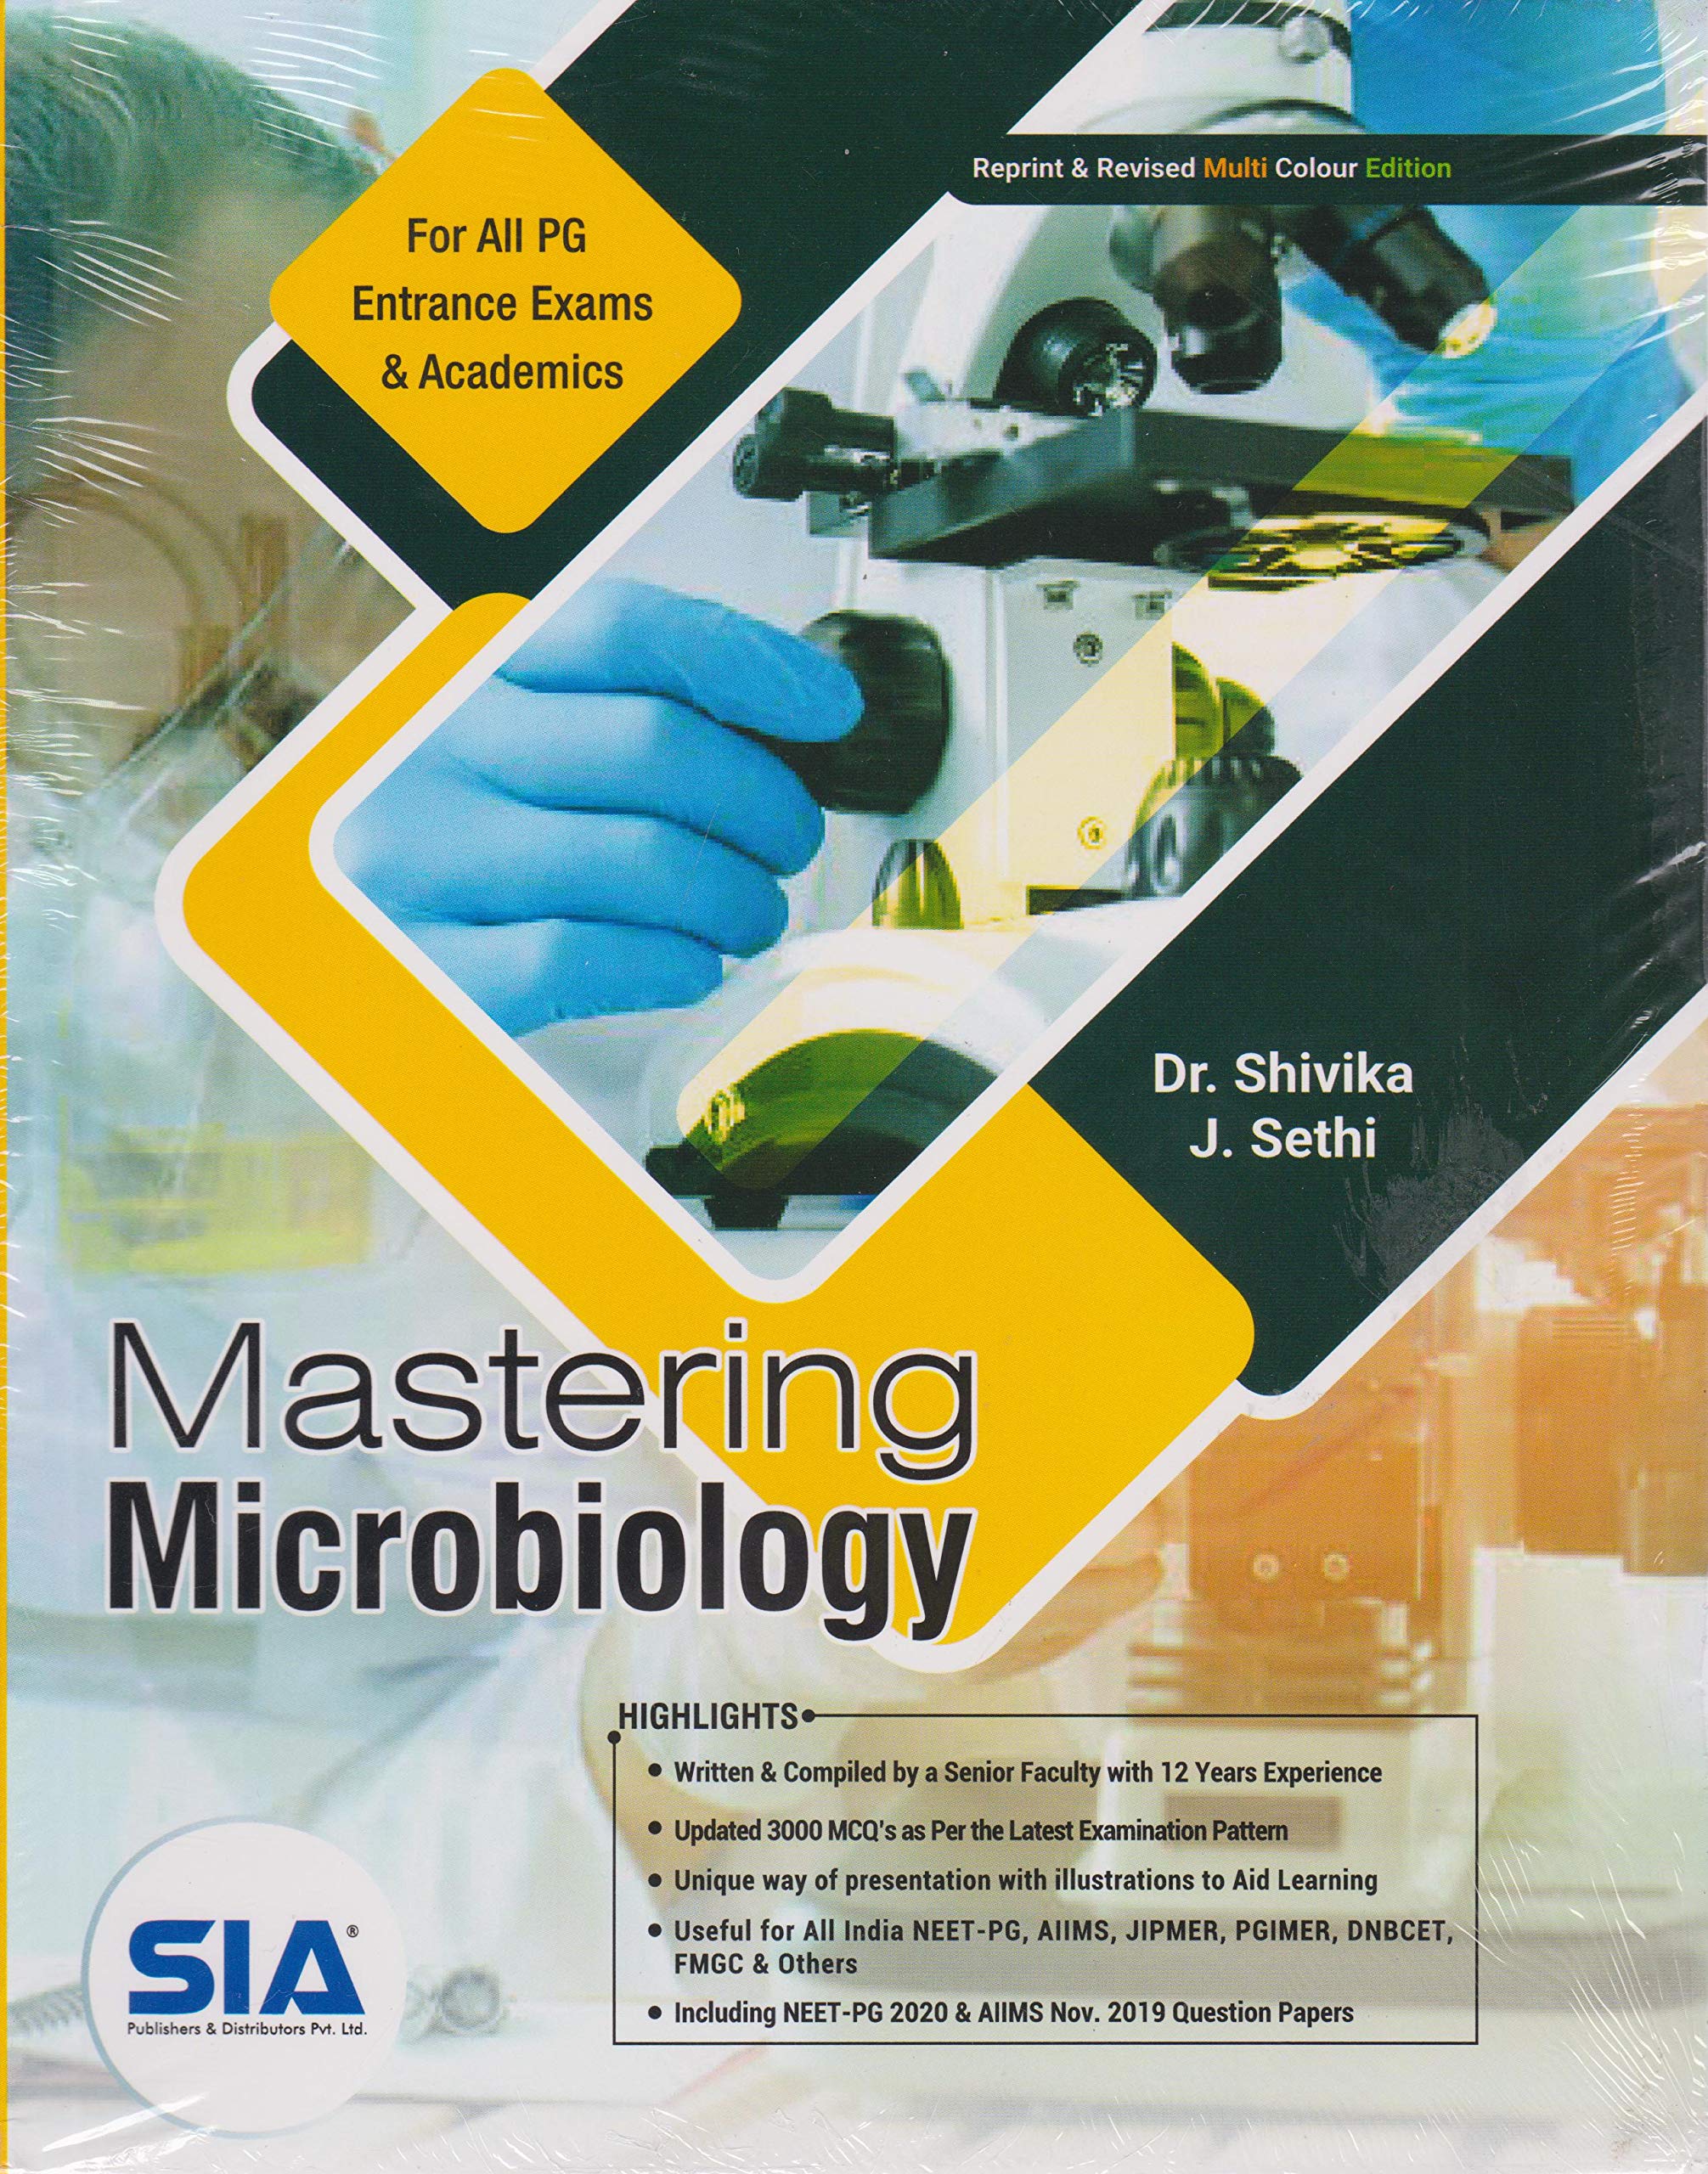 mastering-microbiology-for-all-pg-entrance-exams-and-academics-multi-colour-edition